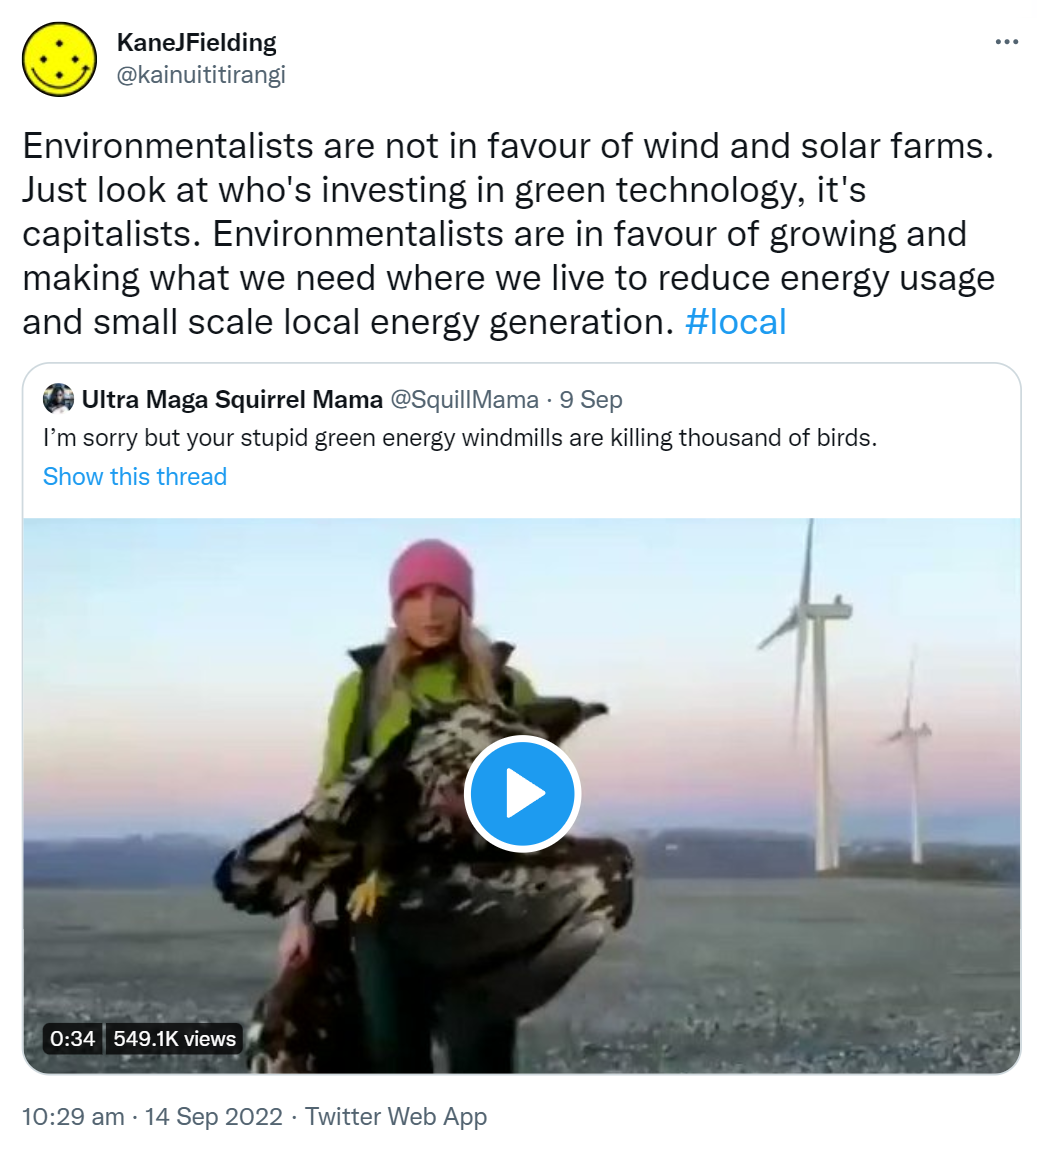 Environmentalists are not in favour of wind and solar farms. Just look at who's investing in green technology, it's capitalists. Environmentalists are in favour of growing and making what we need where we live to reduce energy usage and small scale local energy generation. Hashtag local. Quote Tweet. Ultra Maga Squirrel Mama @SquillMama. I’m sorry but your stupid green energy windmills are killing thousand of birds. 10:29 am · 14 Sep 2022.